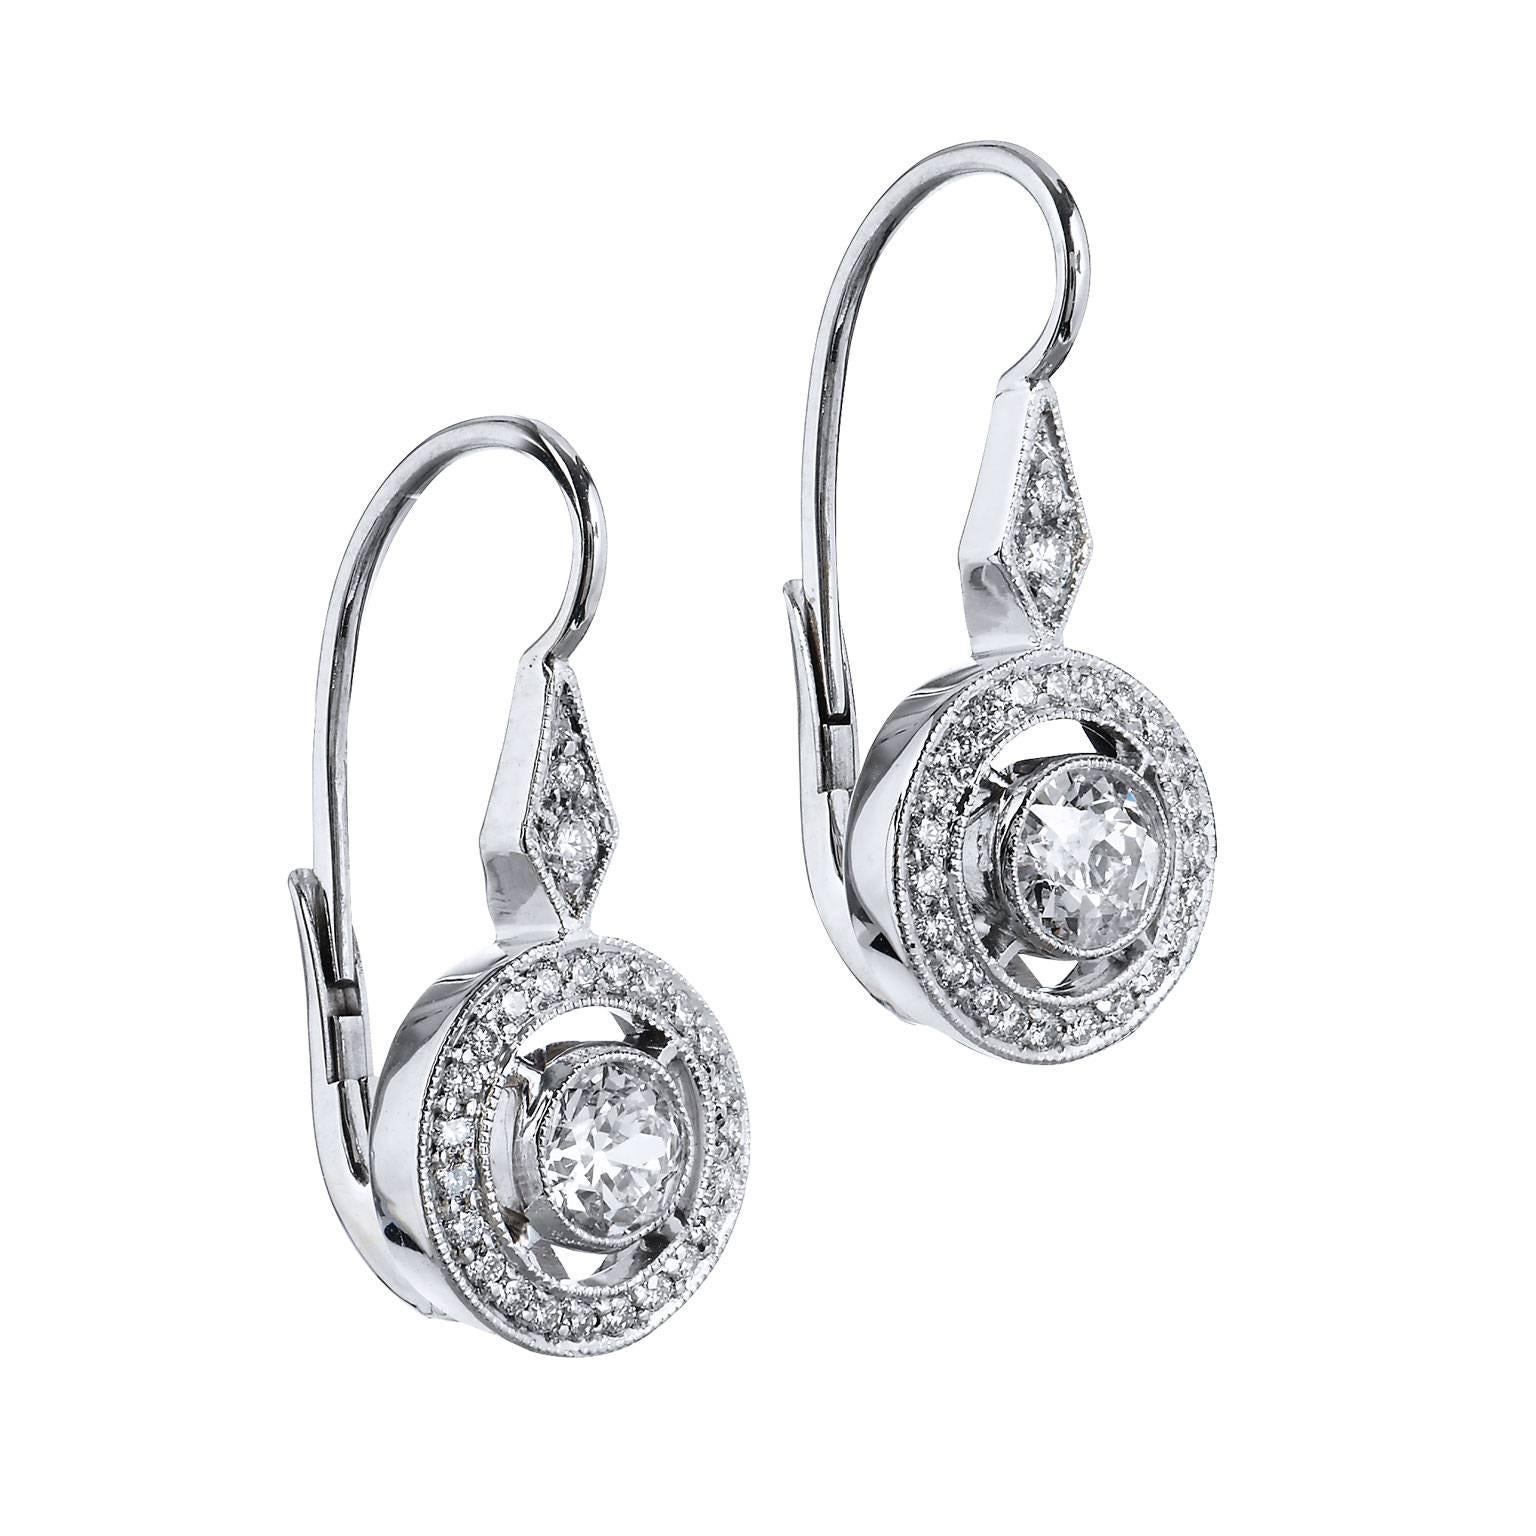 She will treasure these desirable Old European Cut Diamonds married in new eighteen karat white gold leverback earrings. The center diamonds are bezel set and  weight .63 carats TW , G/H Color, VS2/SI1 Clarity
True to the time these earrings feature